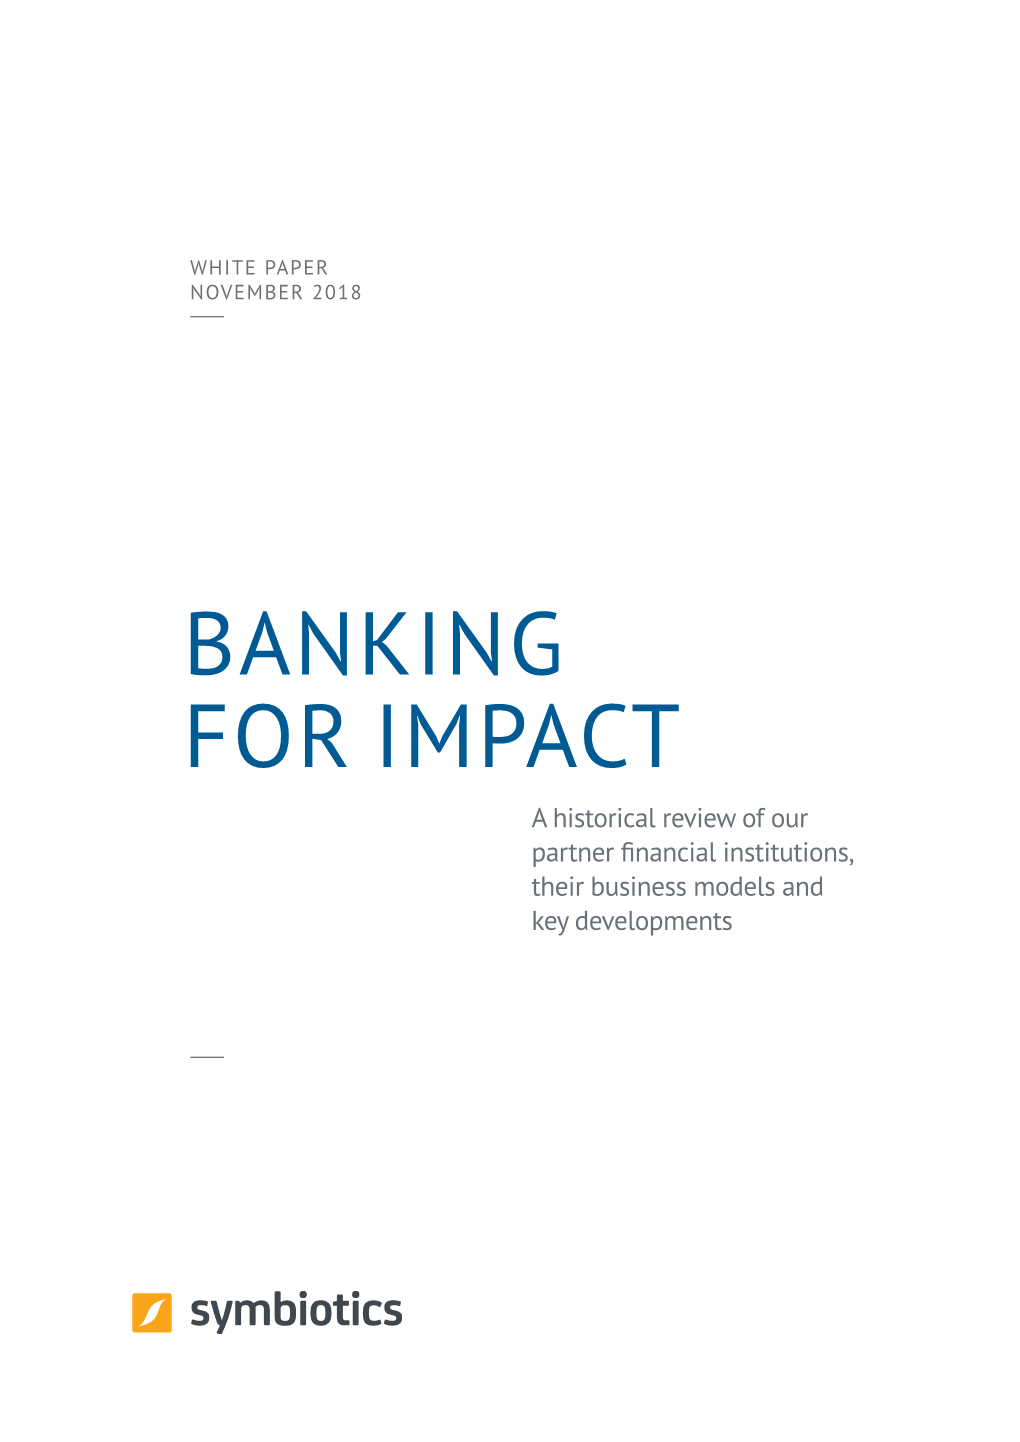 BANKING for IMPACT a Historical Review of Our Partner Financial Institutions, Their Business Models and Key Developments